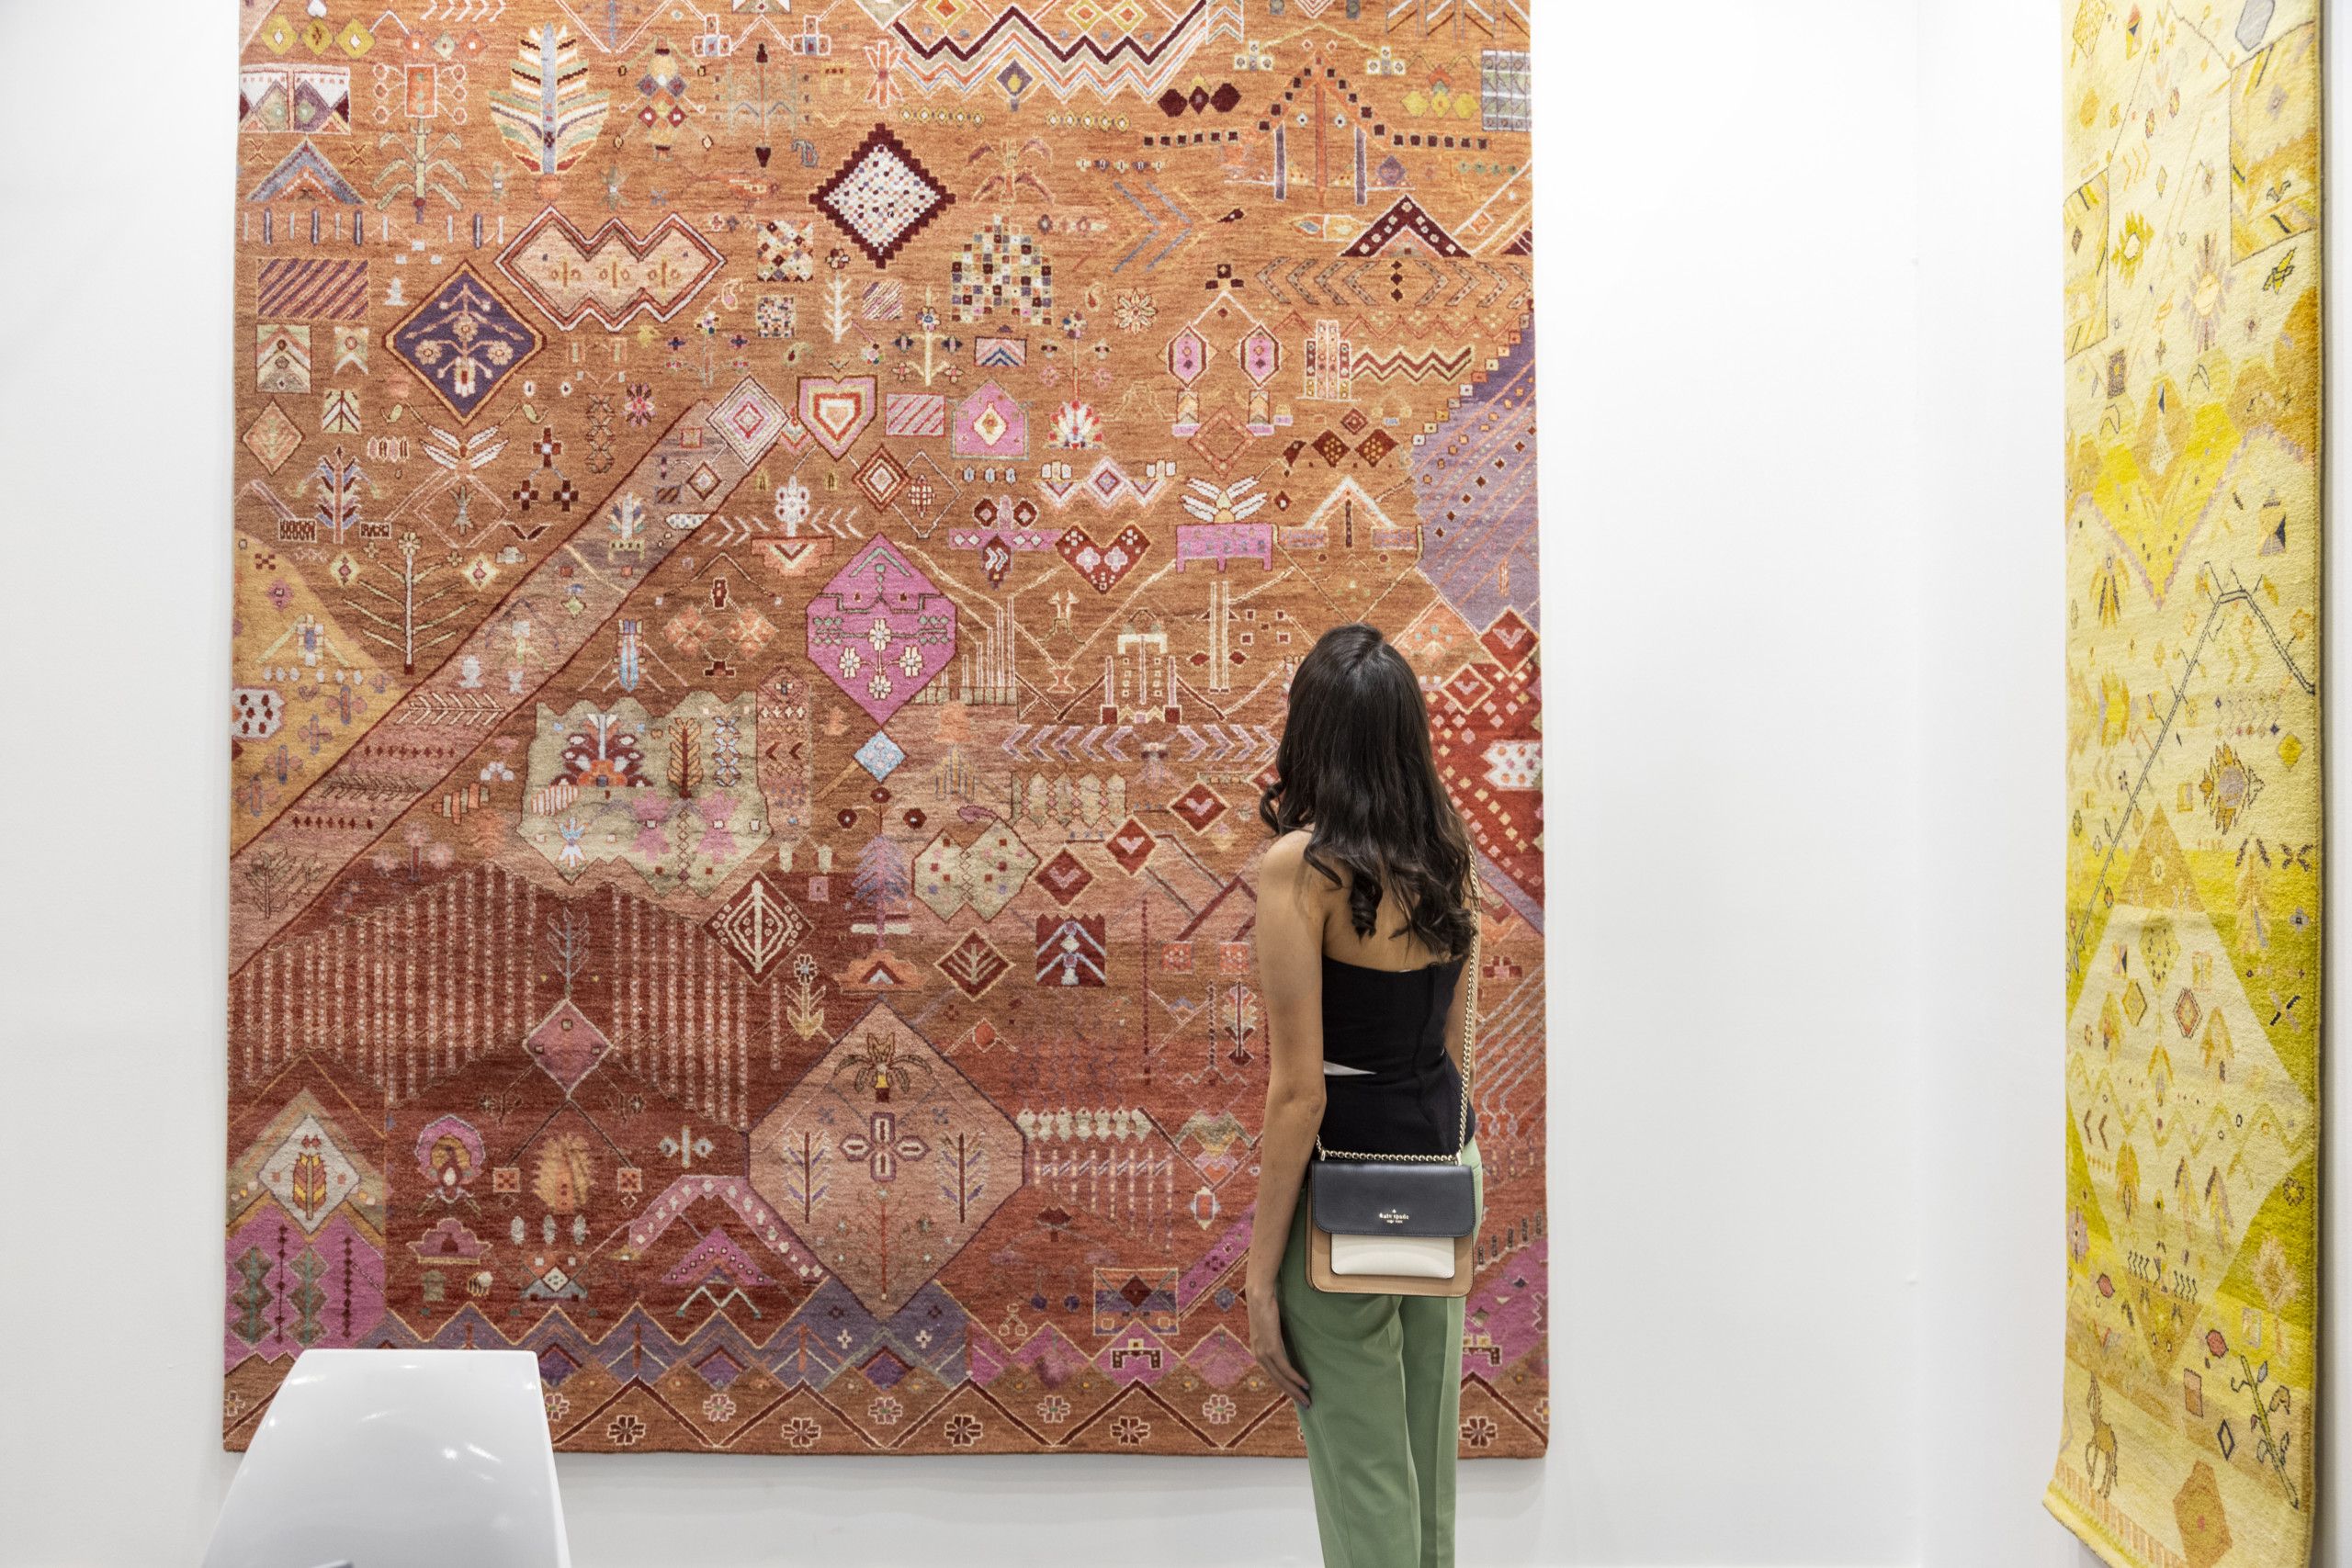 12 Best Art Fairs to Visit in Your Lifetime